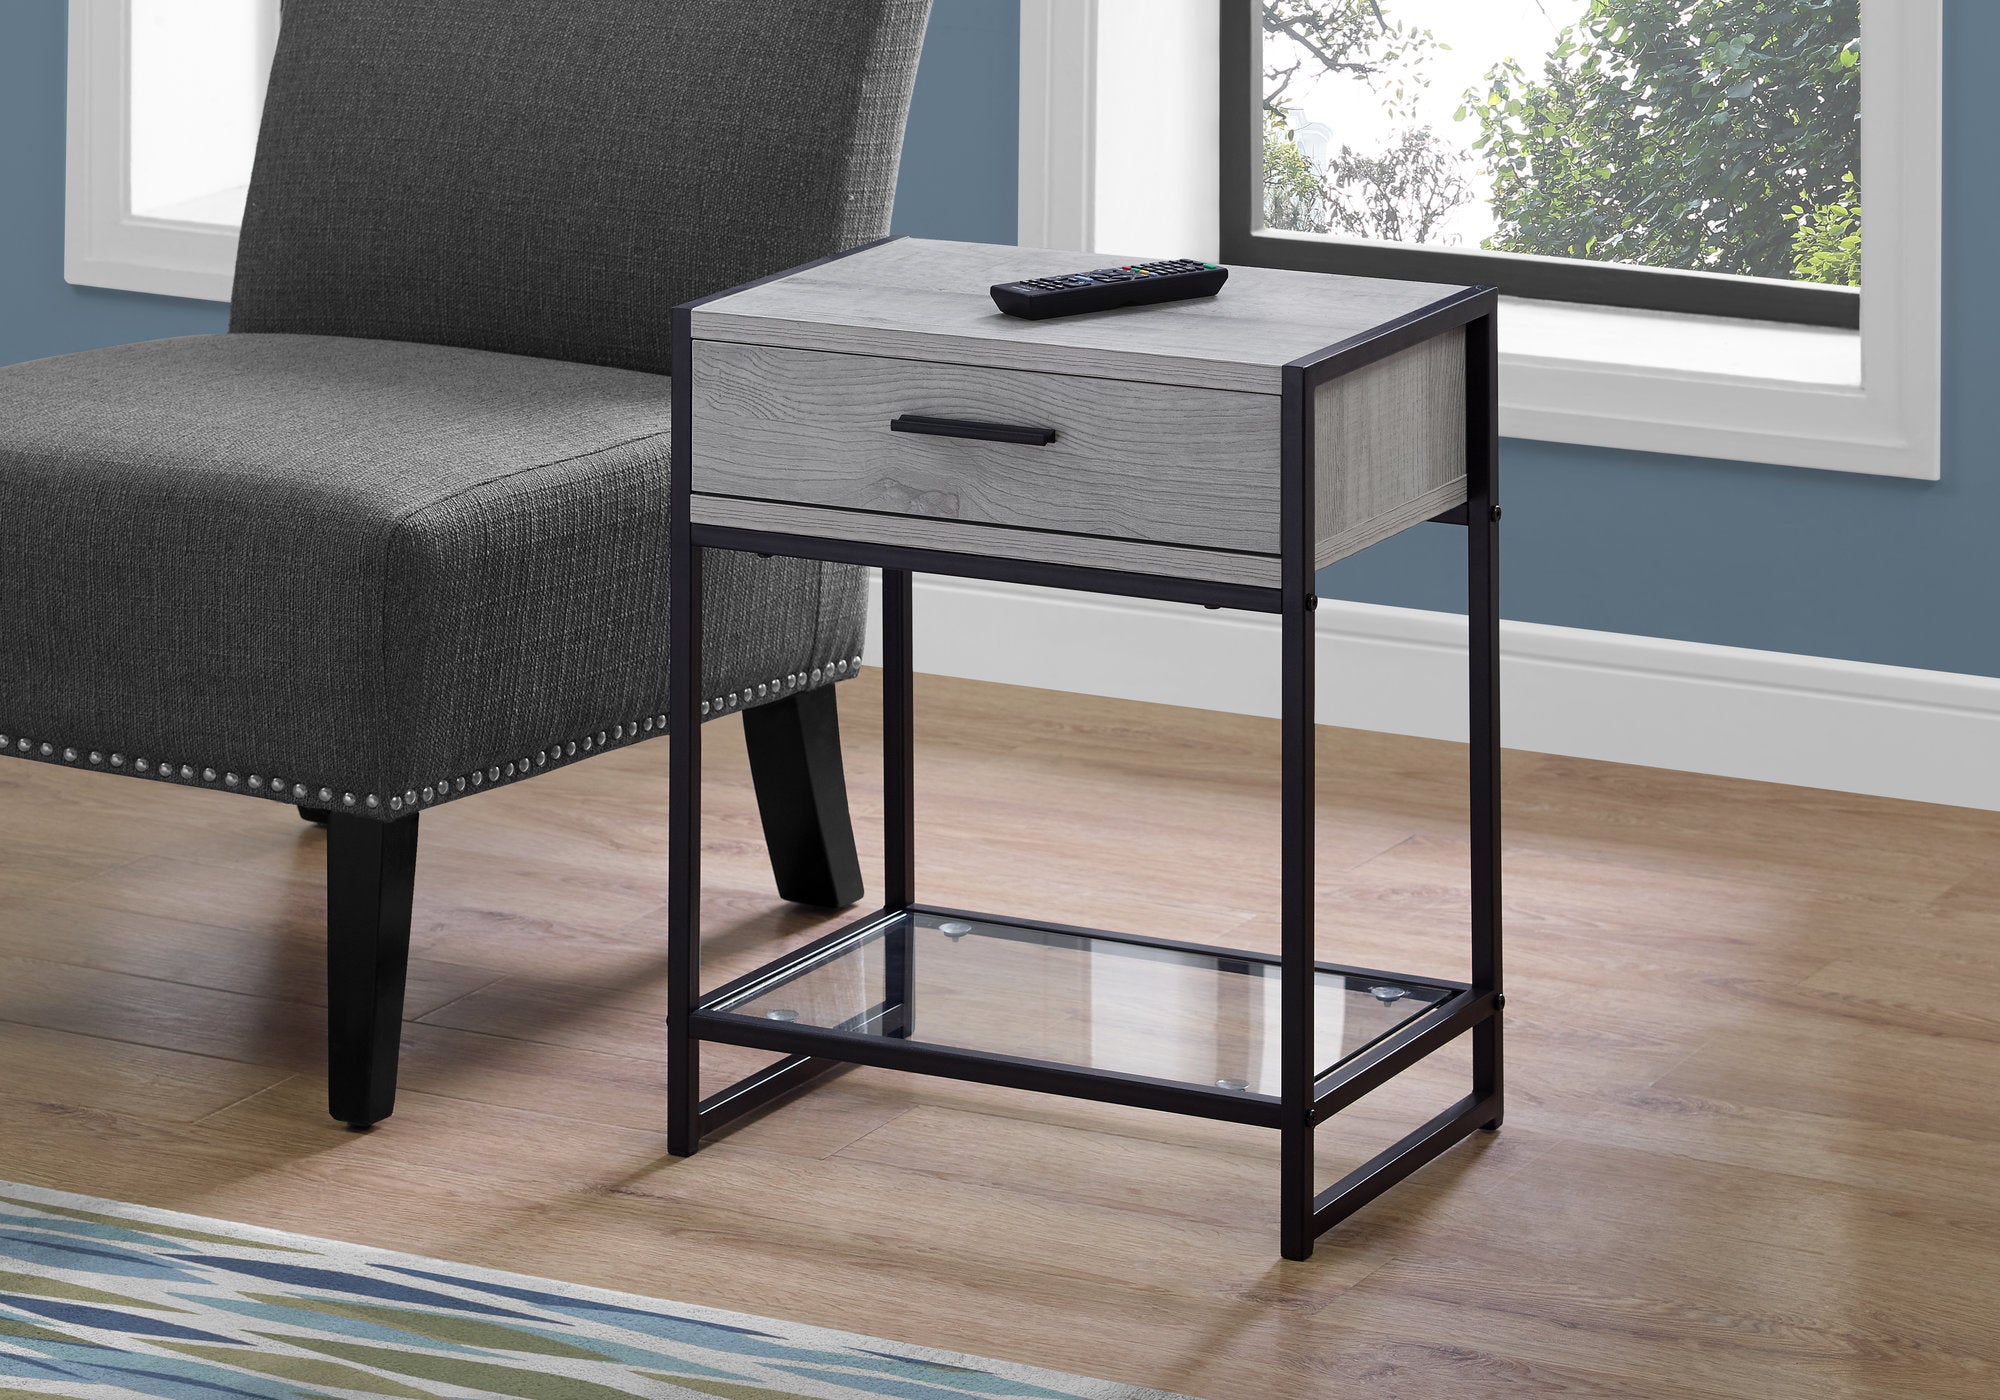 MN-973500    Accent Table, Side, End, Nightstand, Lamp, Living Room, Bedroom, Metal Legs, Tempered Glass And Laminate, Grey, Black, Contemporary, Modern